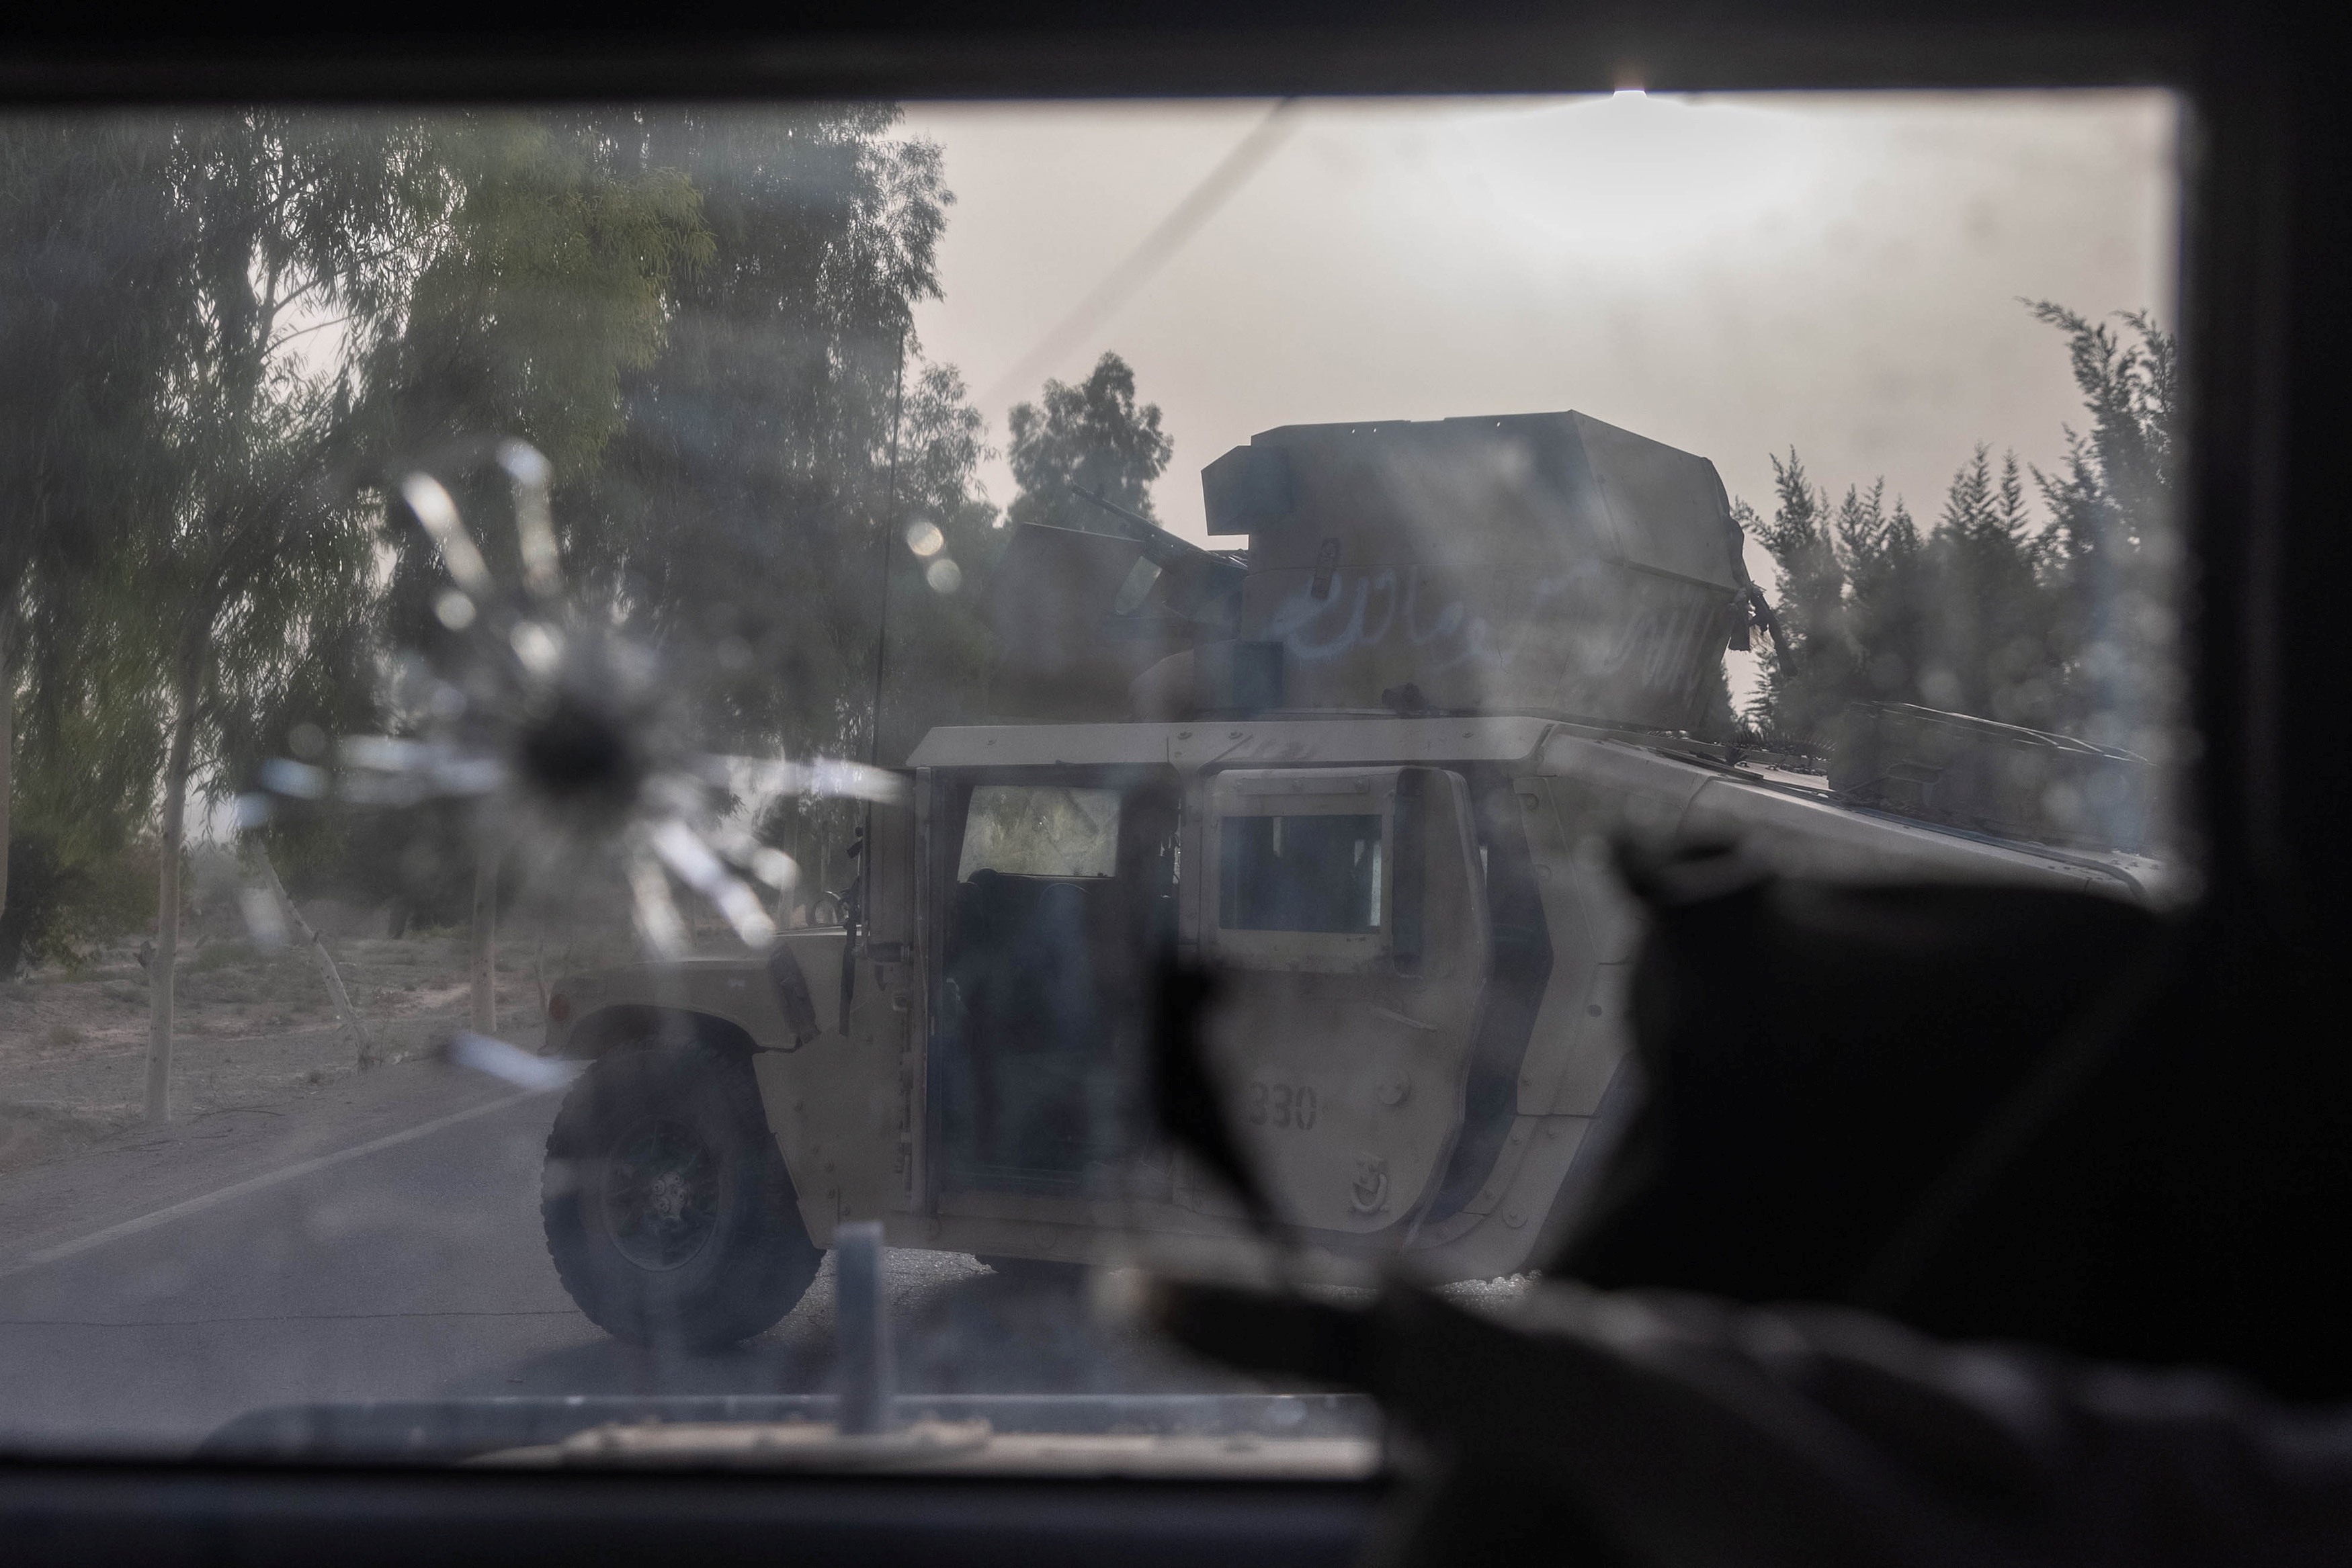 A humvee belonging Afghan Special Forces is seen destroyed during heavy clashes with Taliban during the rescue mission of a police officer besieged at a check post, in Kandahar province